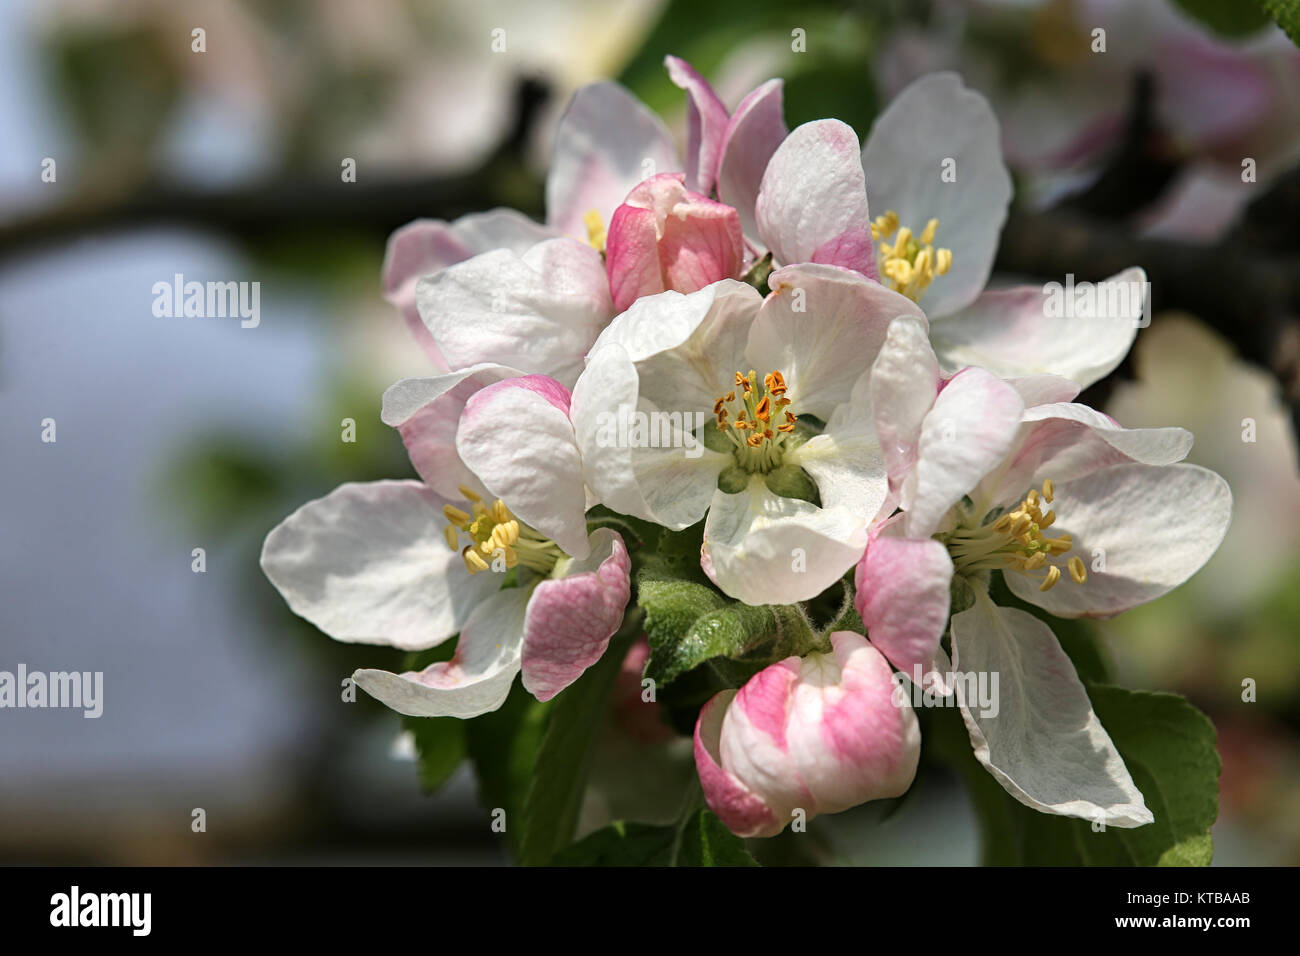 apple blossoms announce spring Stock Photo